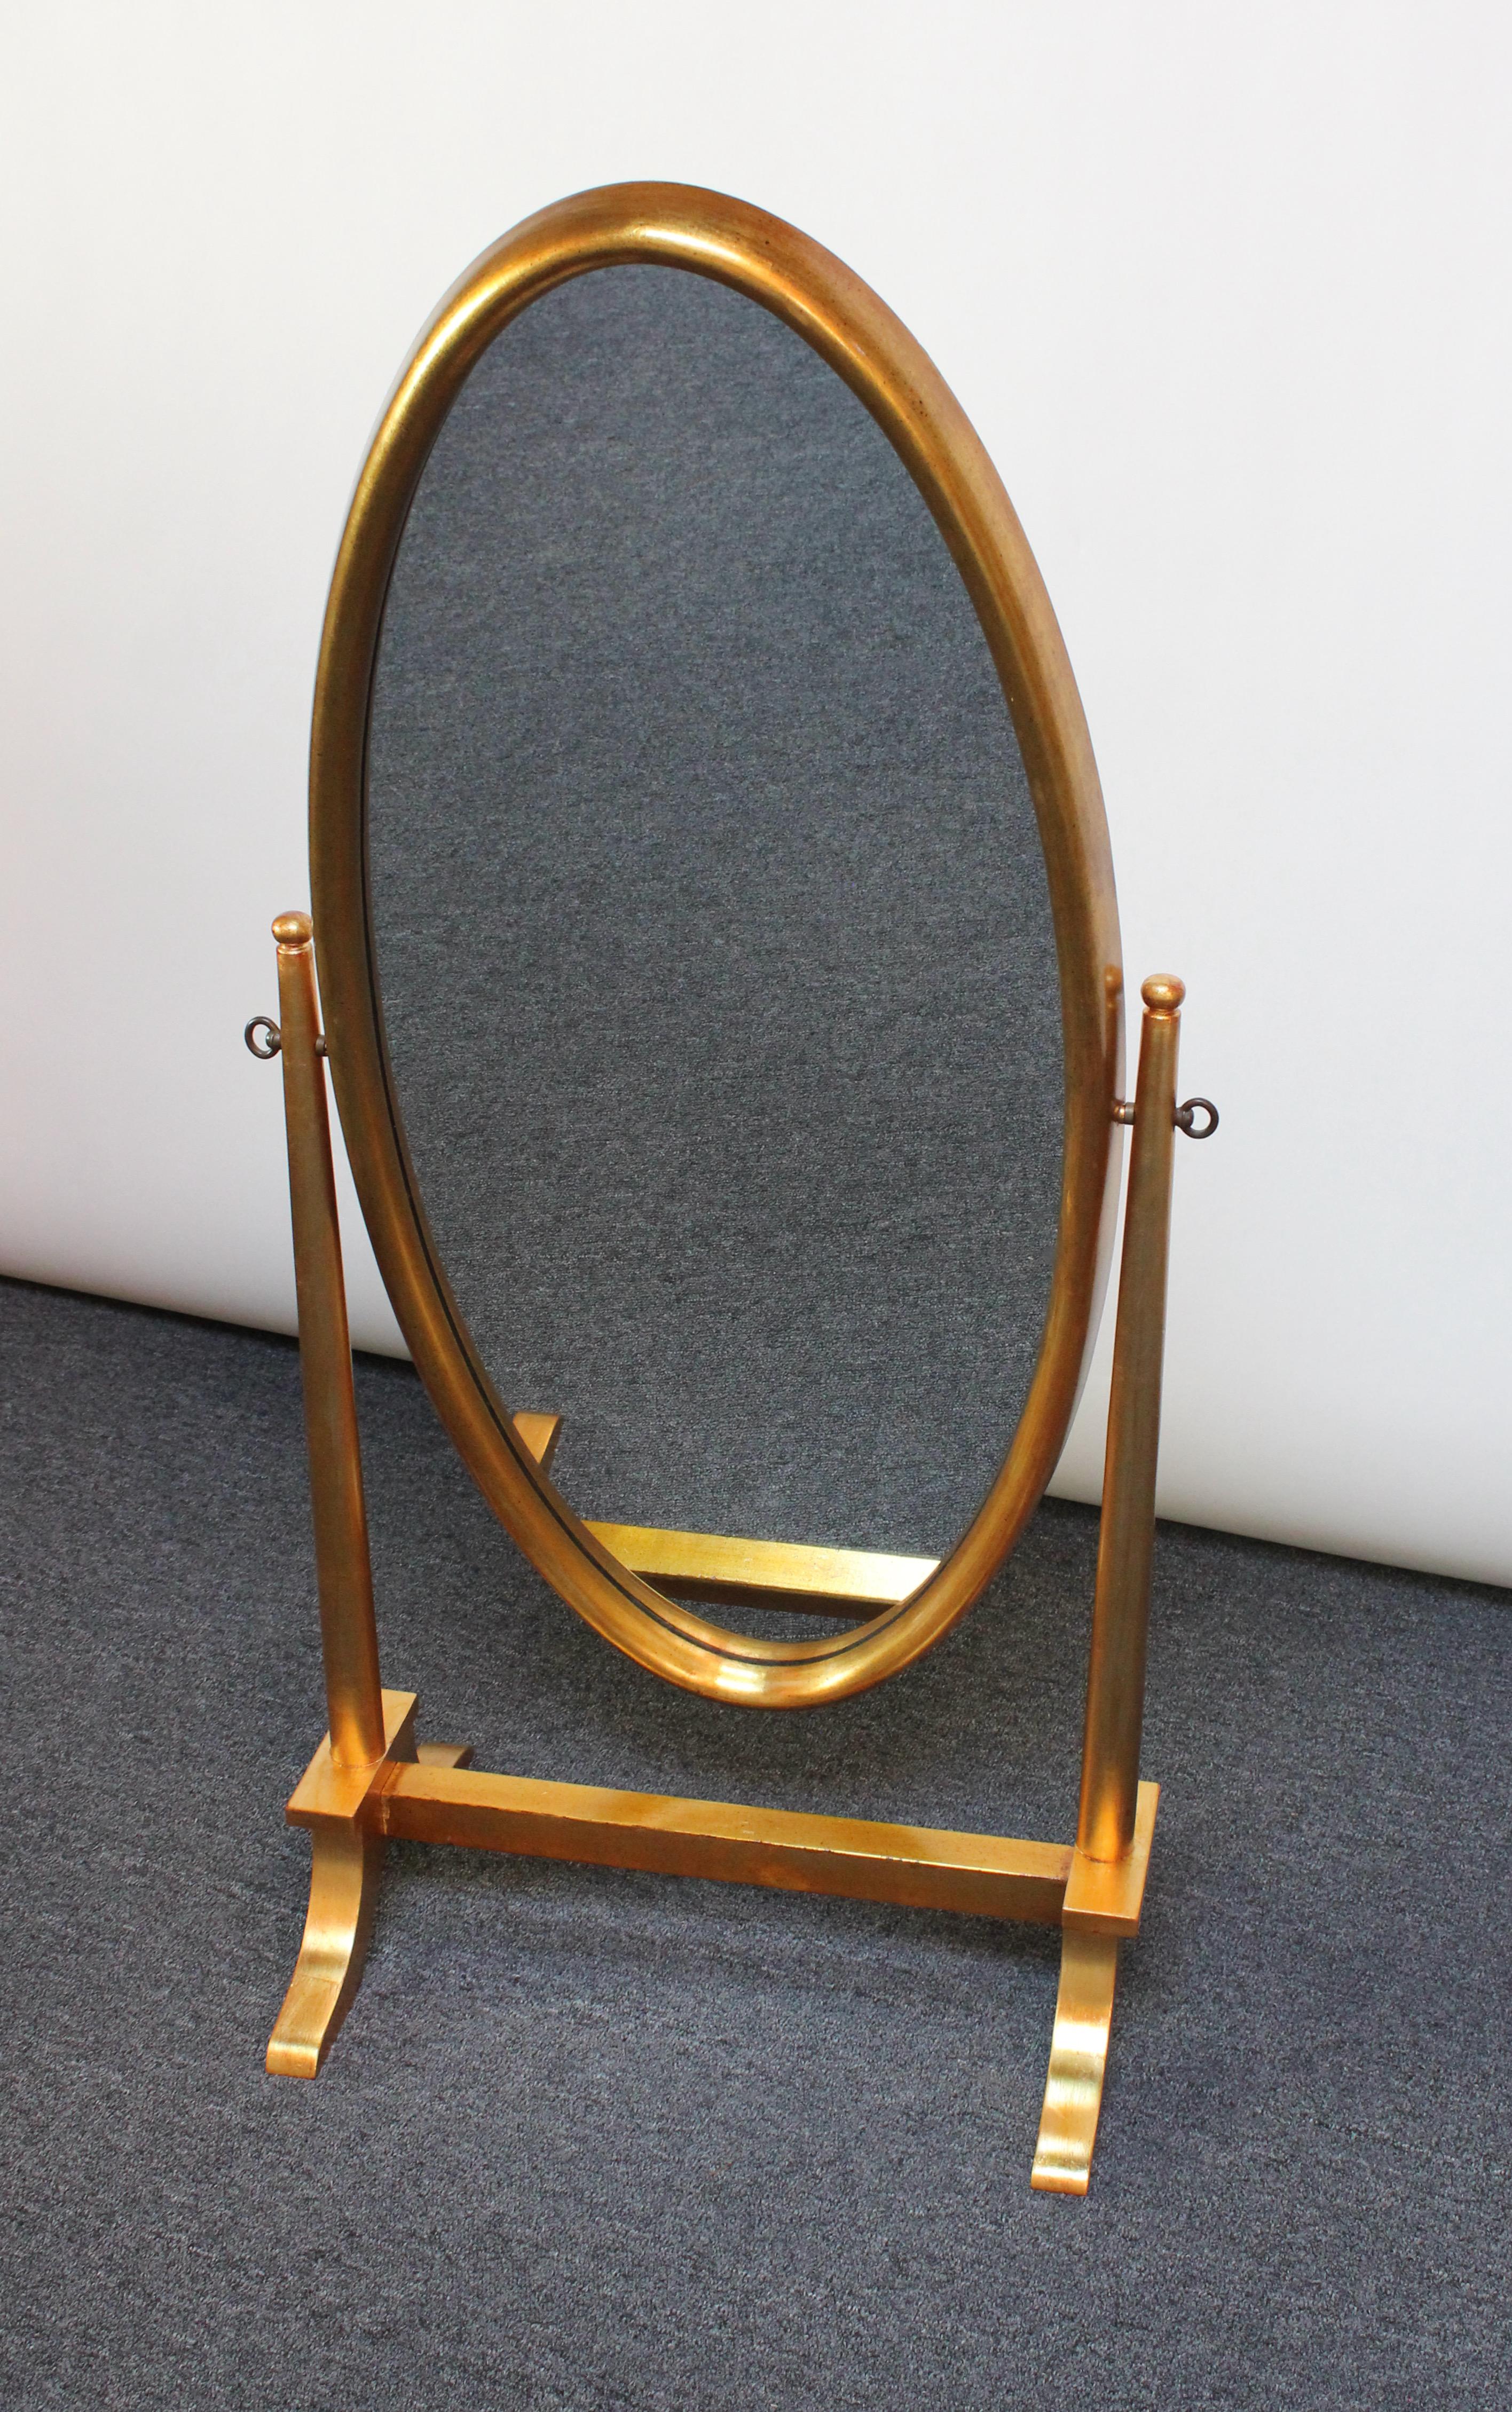 American Labarge Hollywood Regency-Style Giltwood Oval Cheval Floor Mirror For Sale